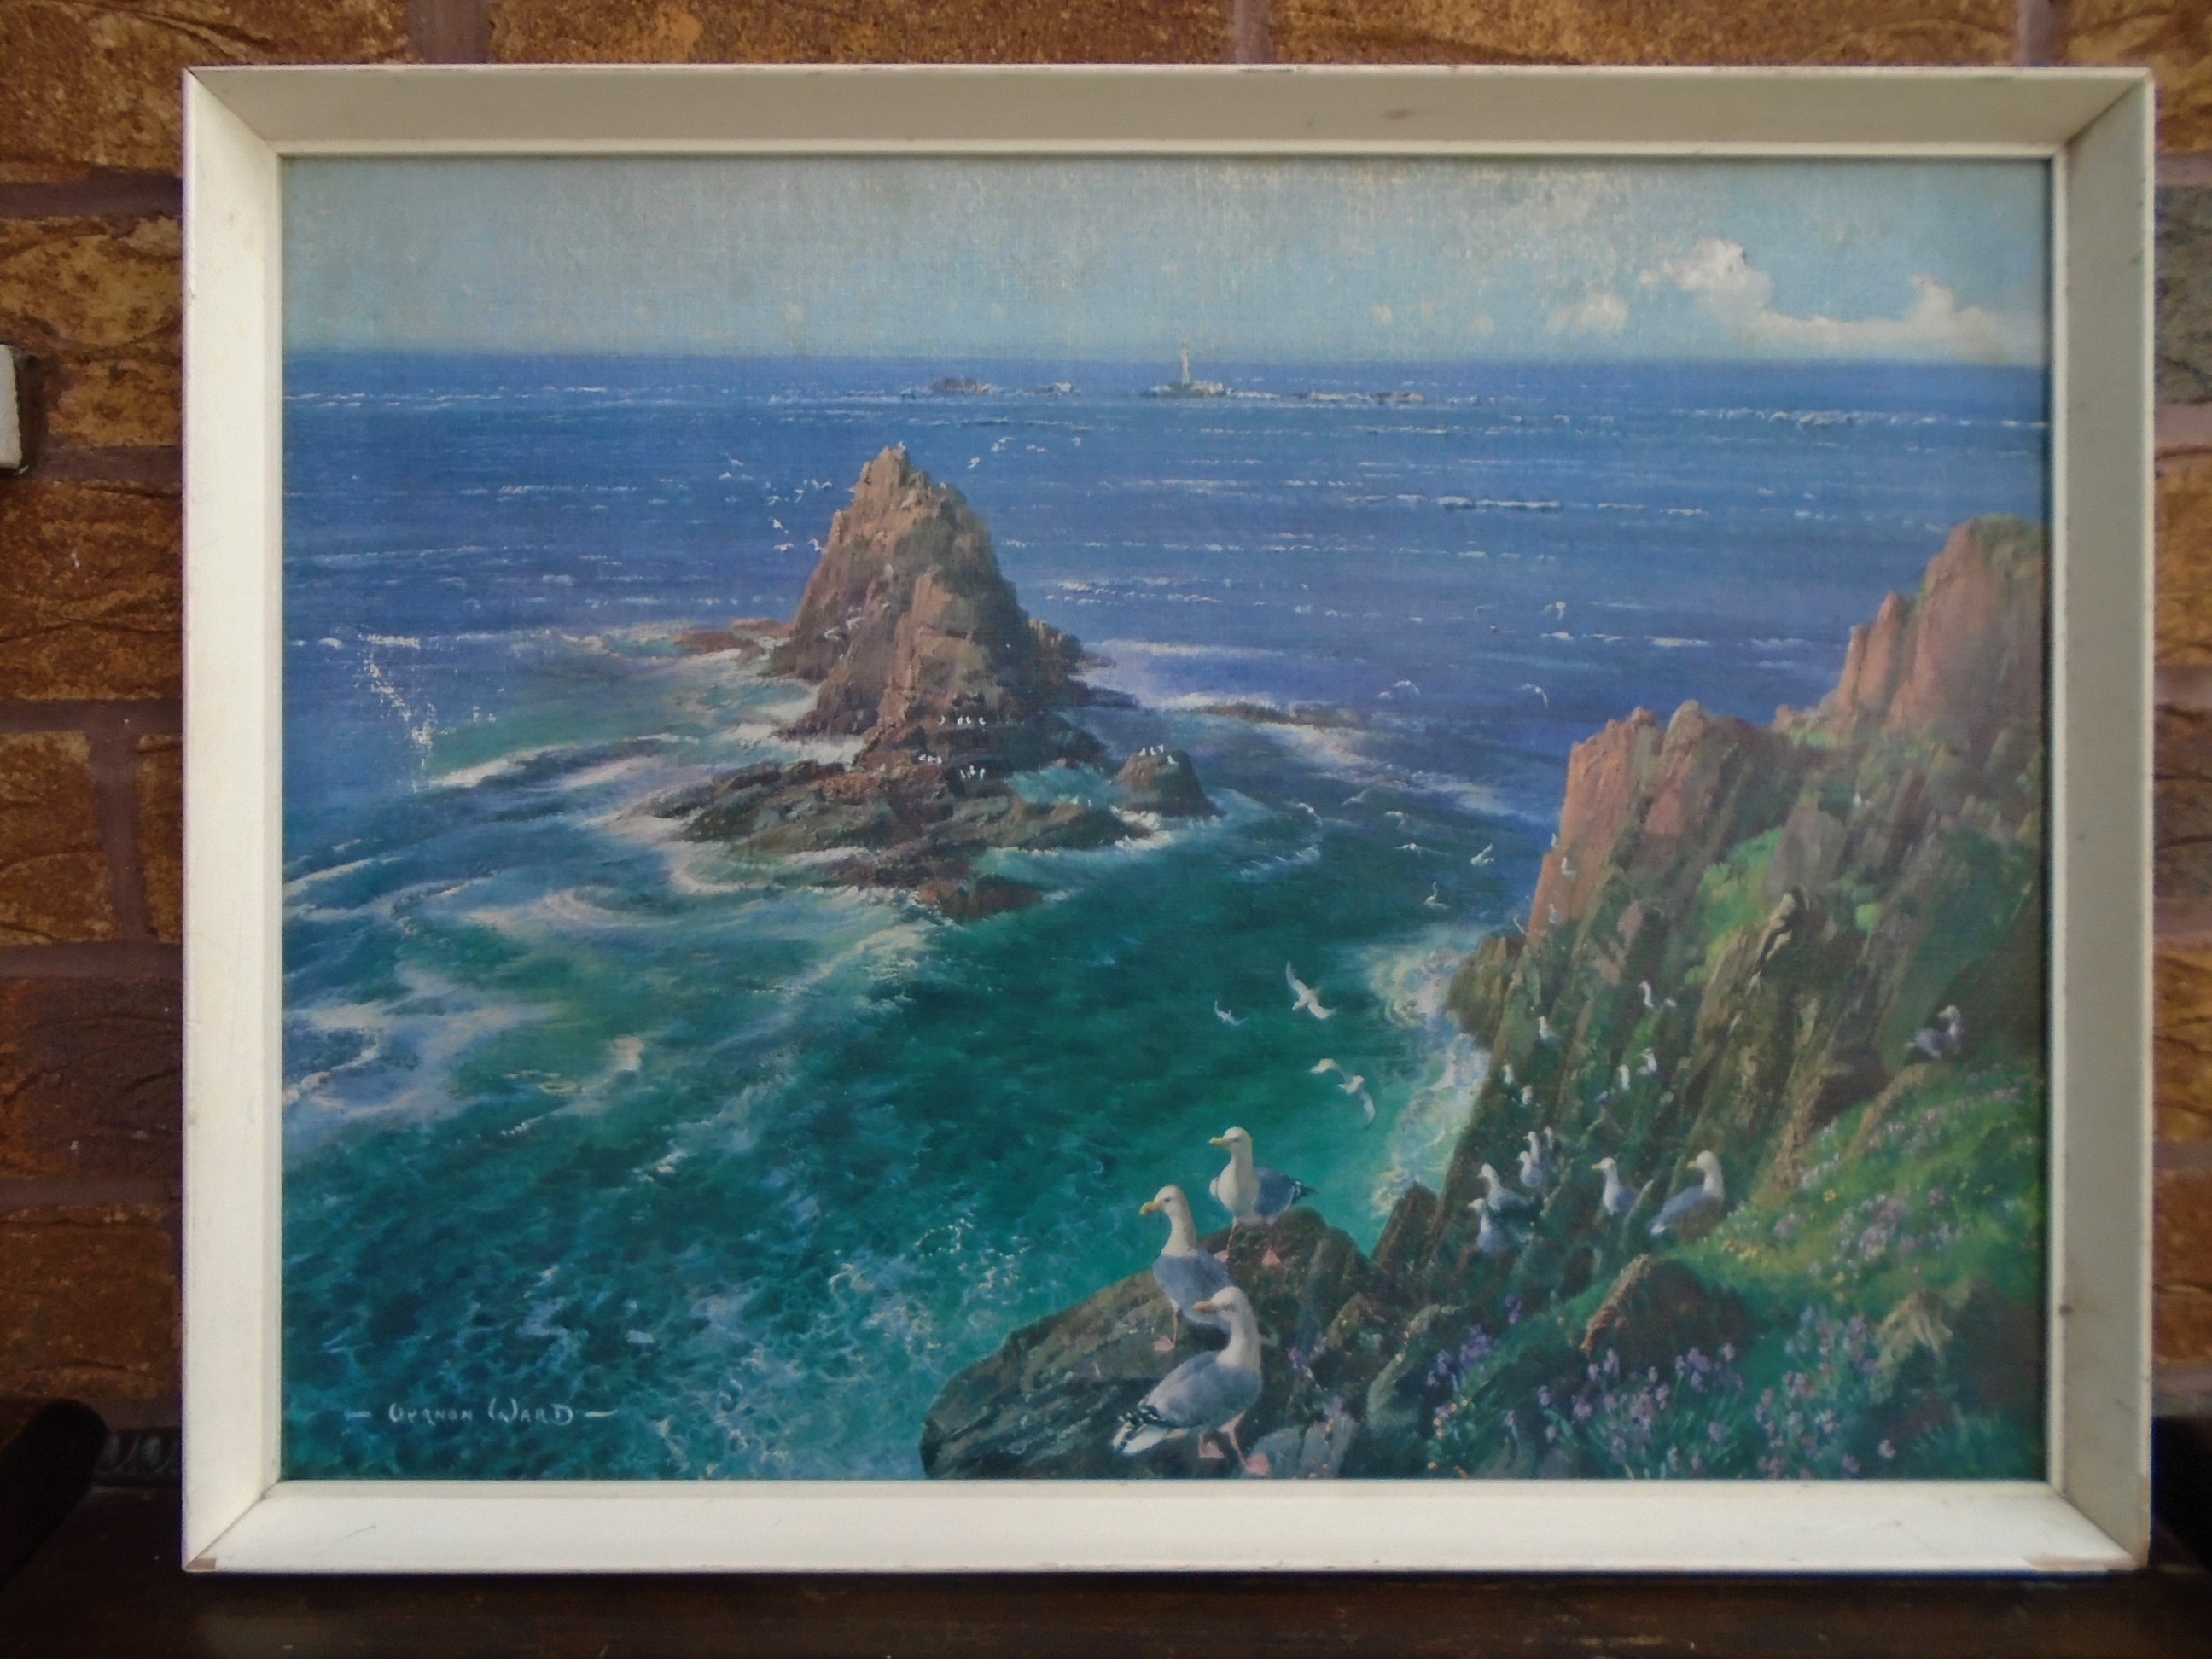 Offered for sale is a vintage framed (not glazed) textured  print of Armed Knight, Land's End, Cornwall' by Vernon Ward. 